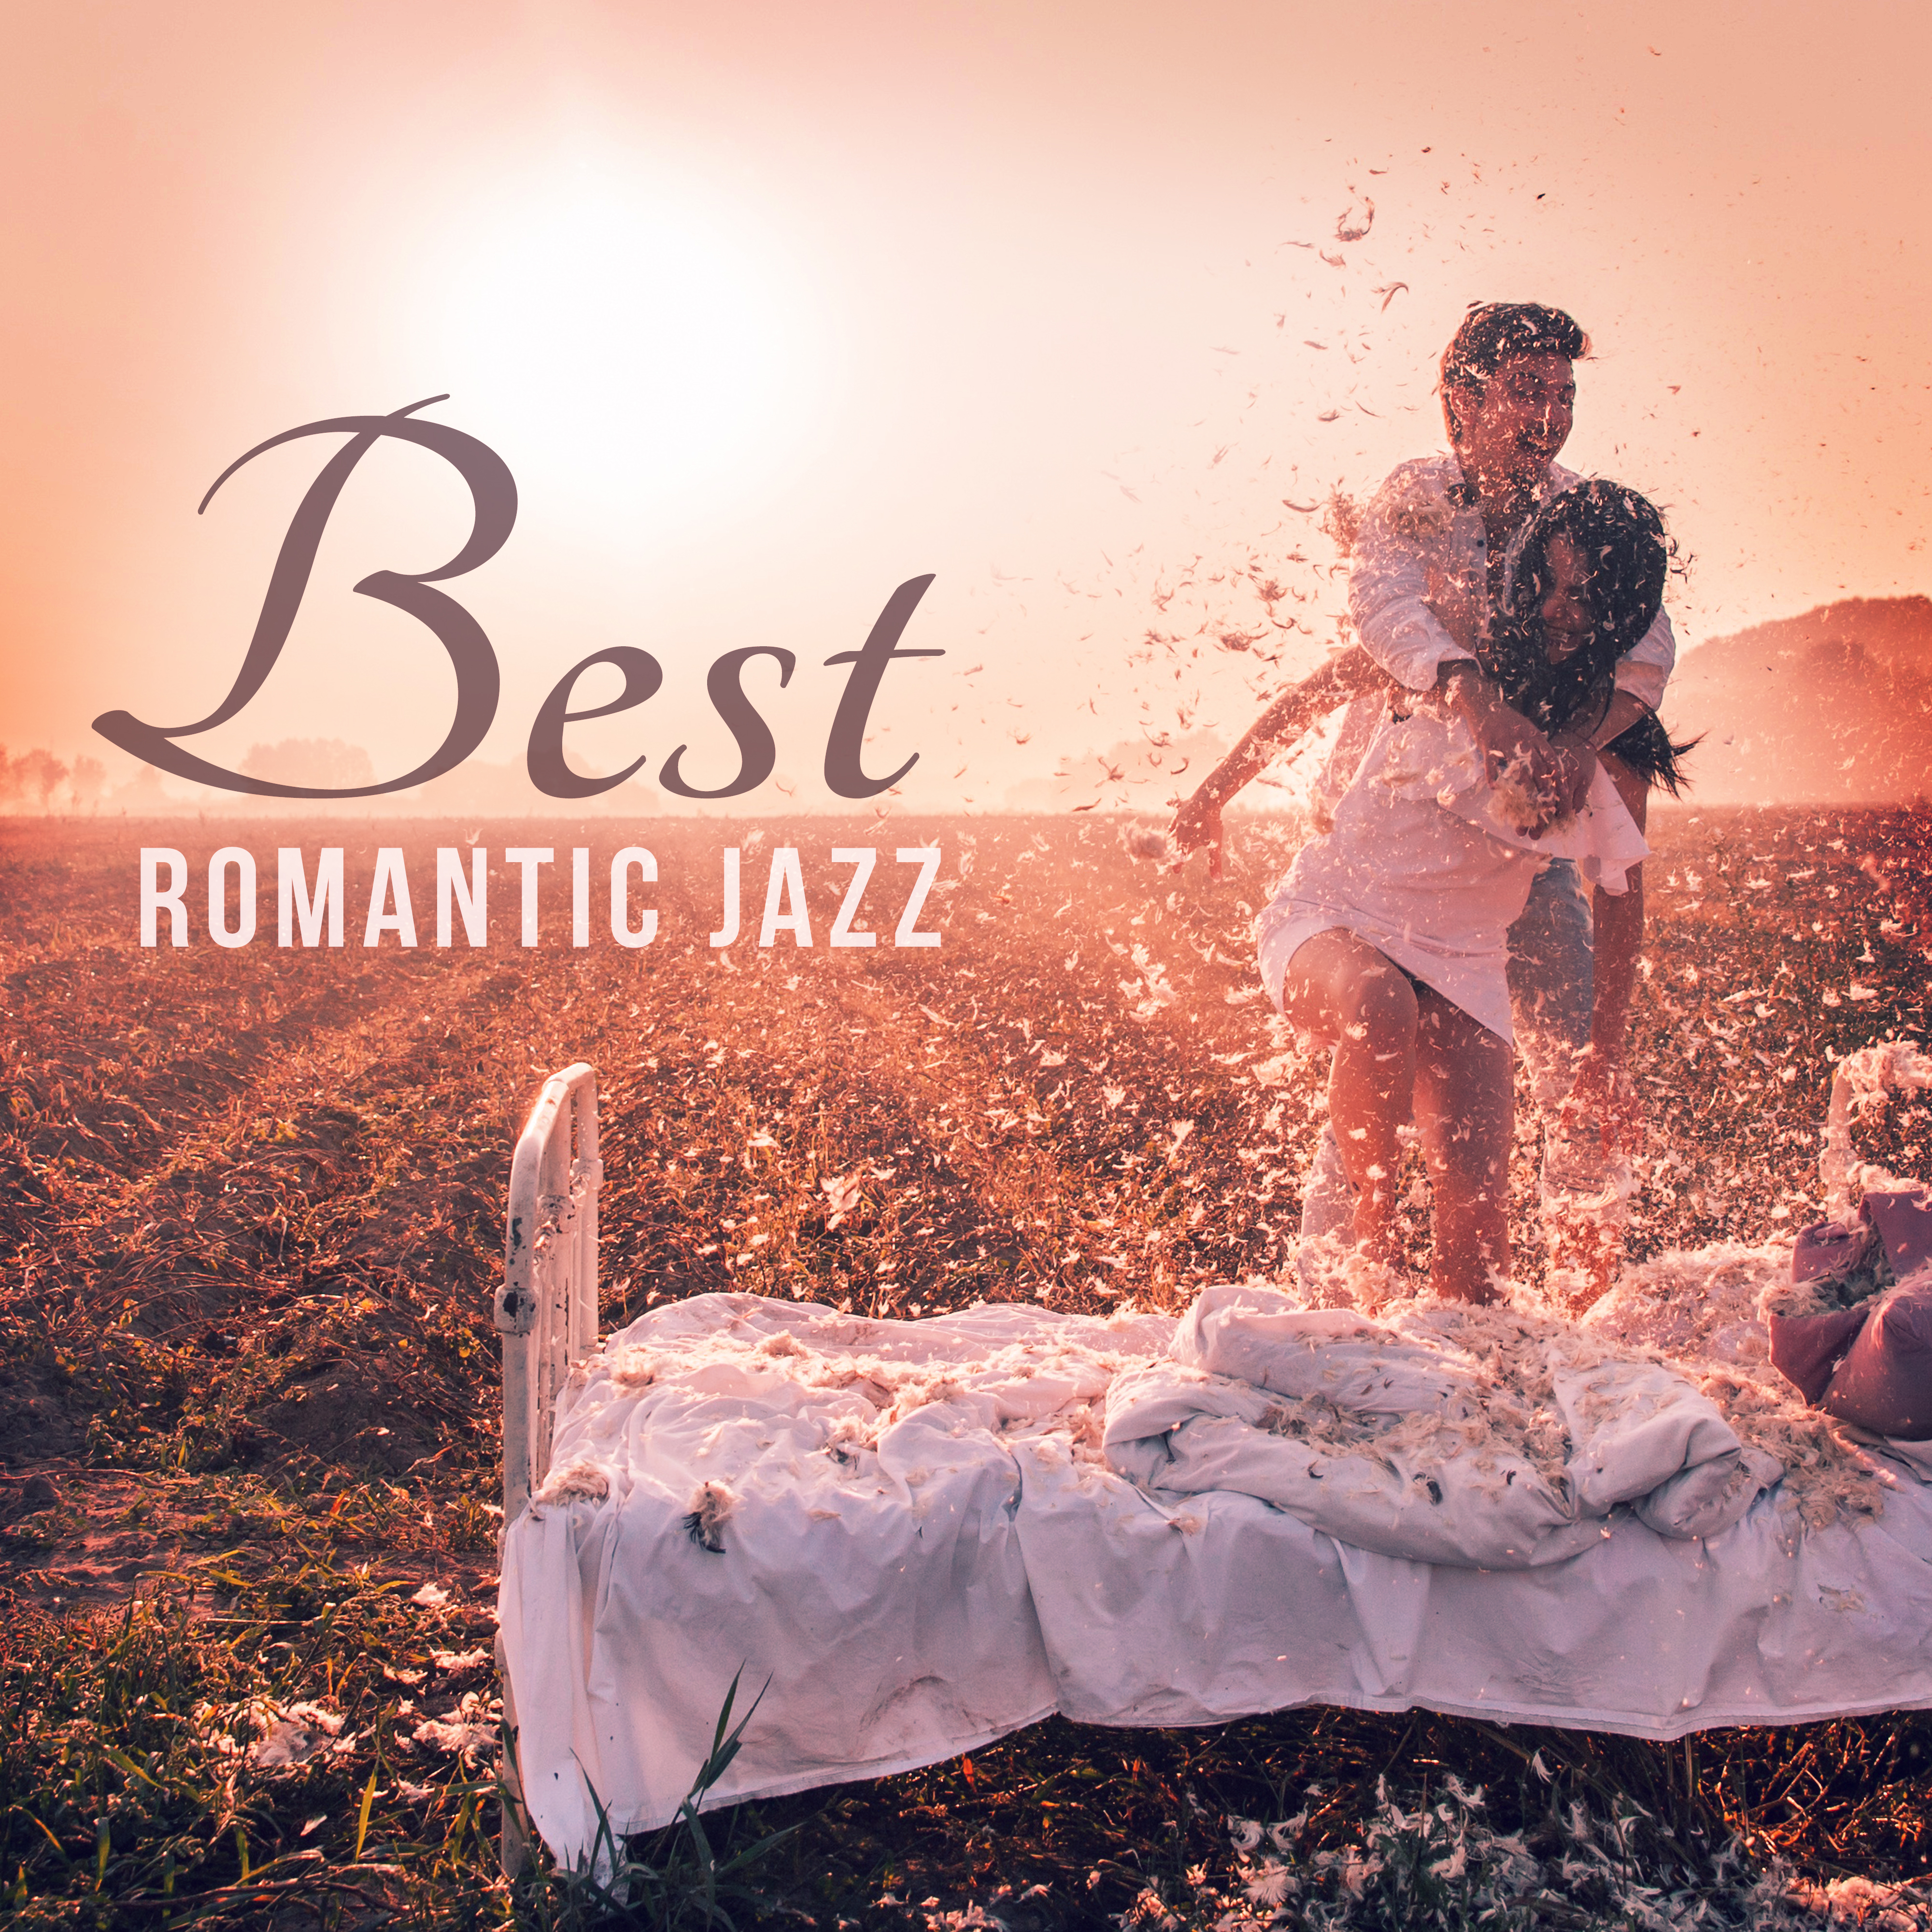 Best Romantic Jazz – Instrumental Sounds for Lovers, Sensual Music, Gentle Piano, Relax for Two, Romantic Evening, Dinner by Candlelight, Sexy Jazz